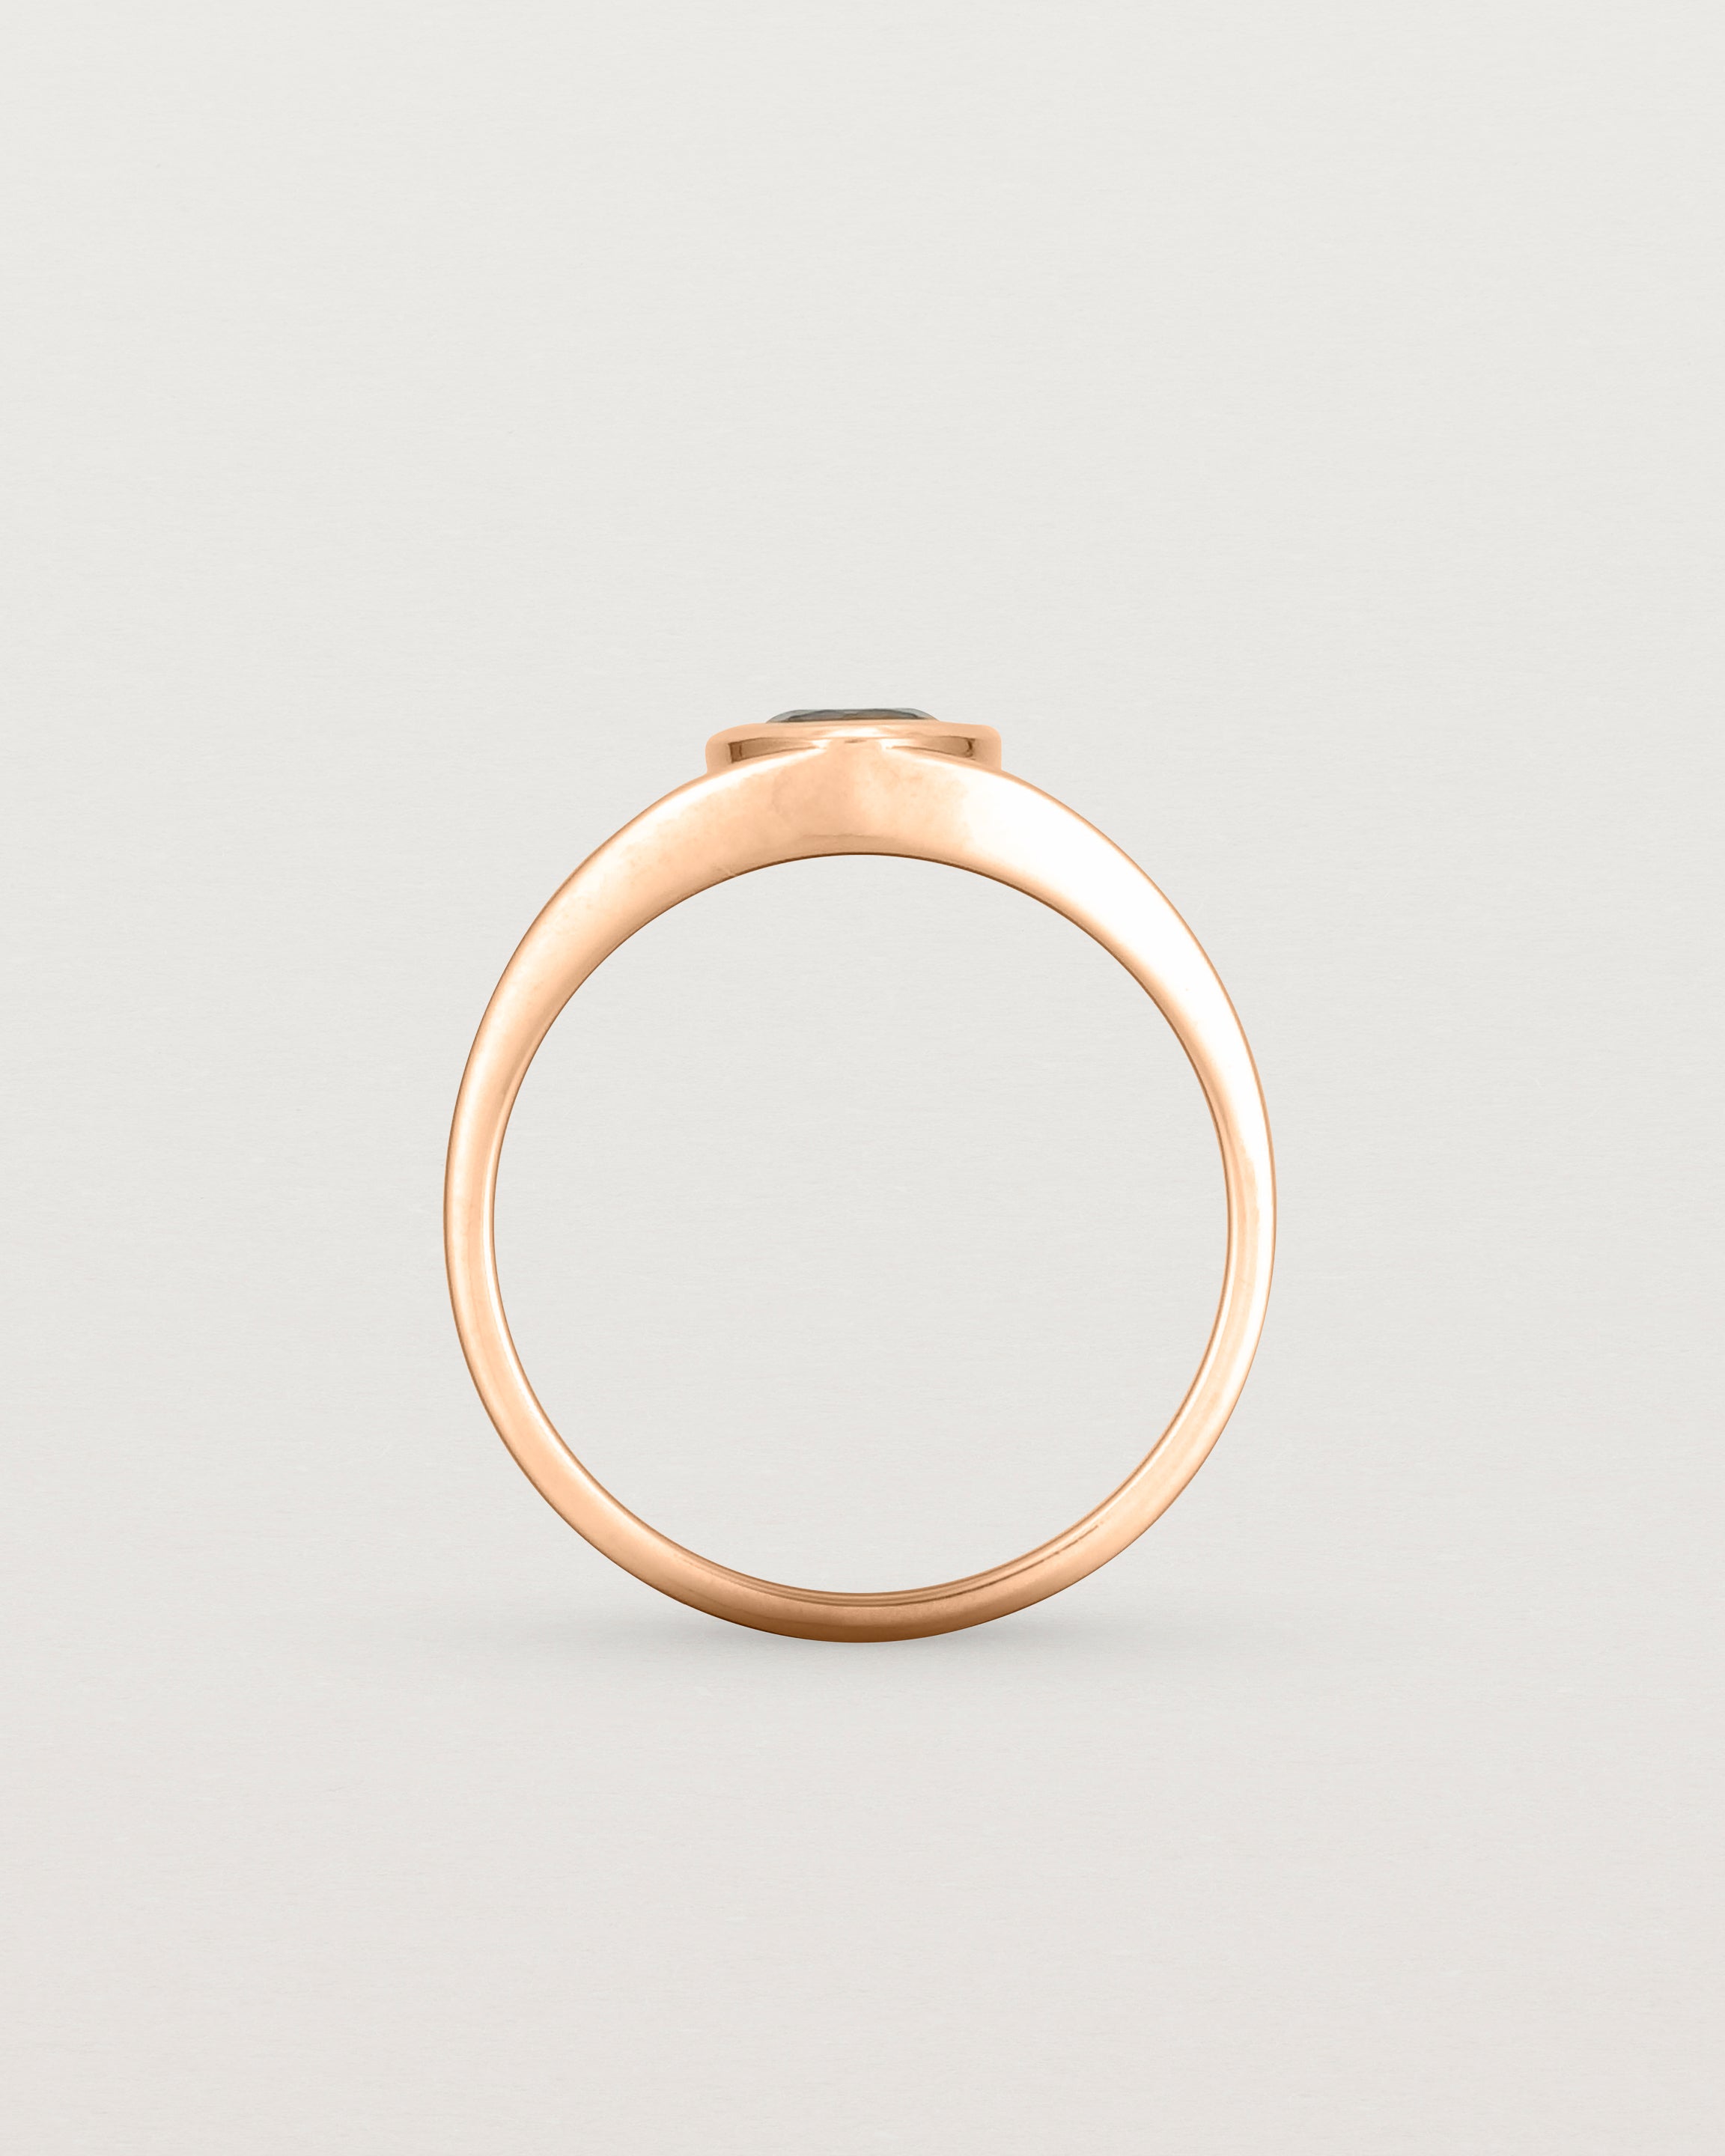 standing view of the Amos Ring | Australian Sapphire in Rose Gold.